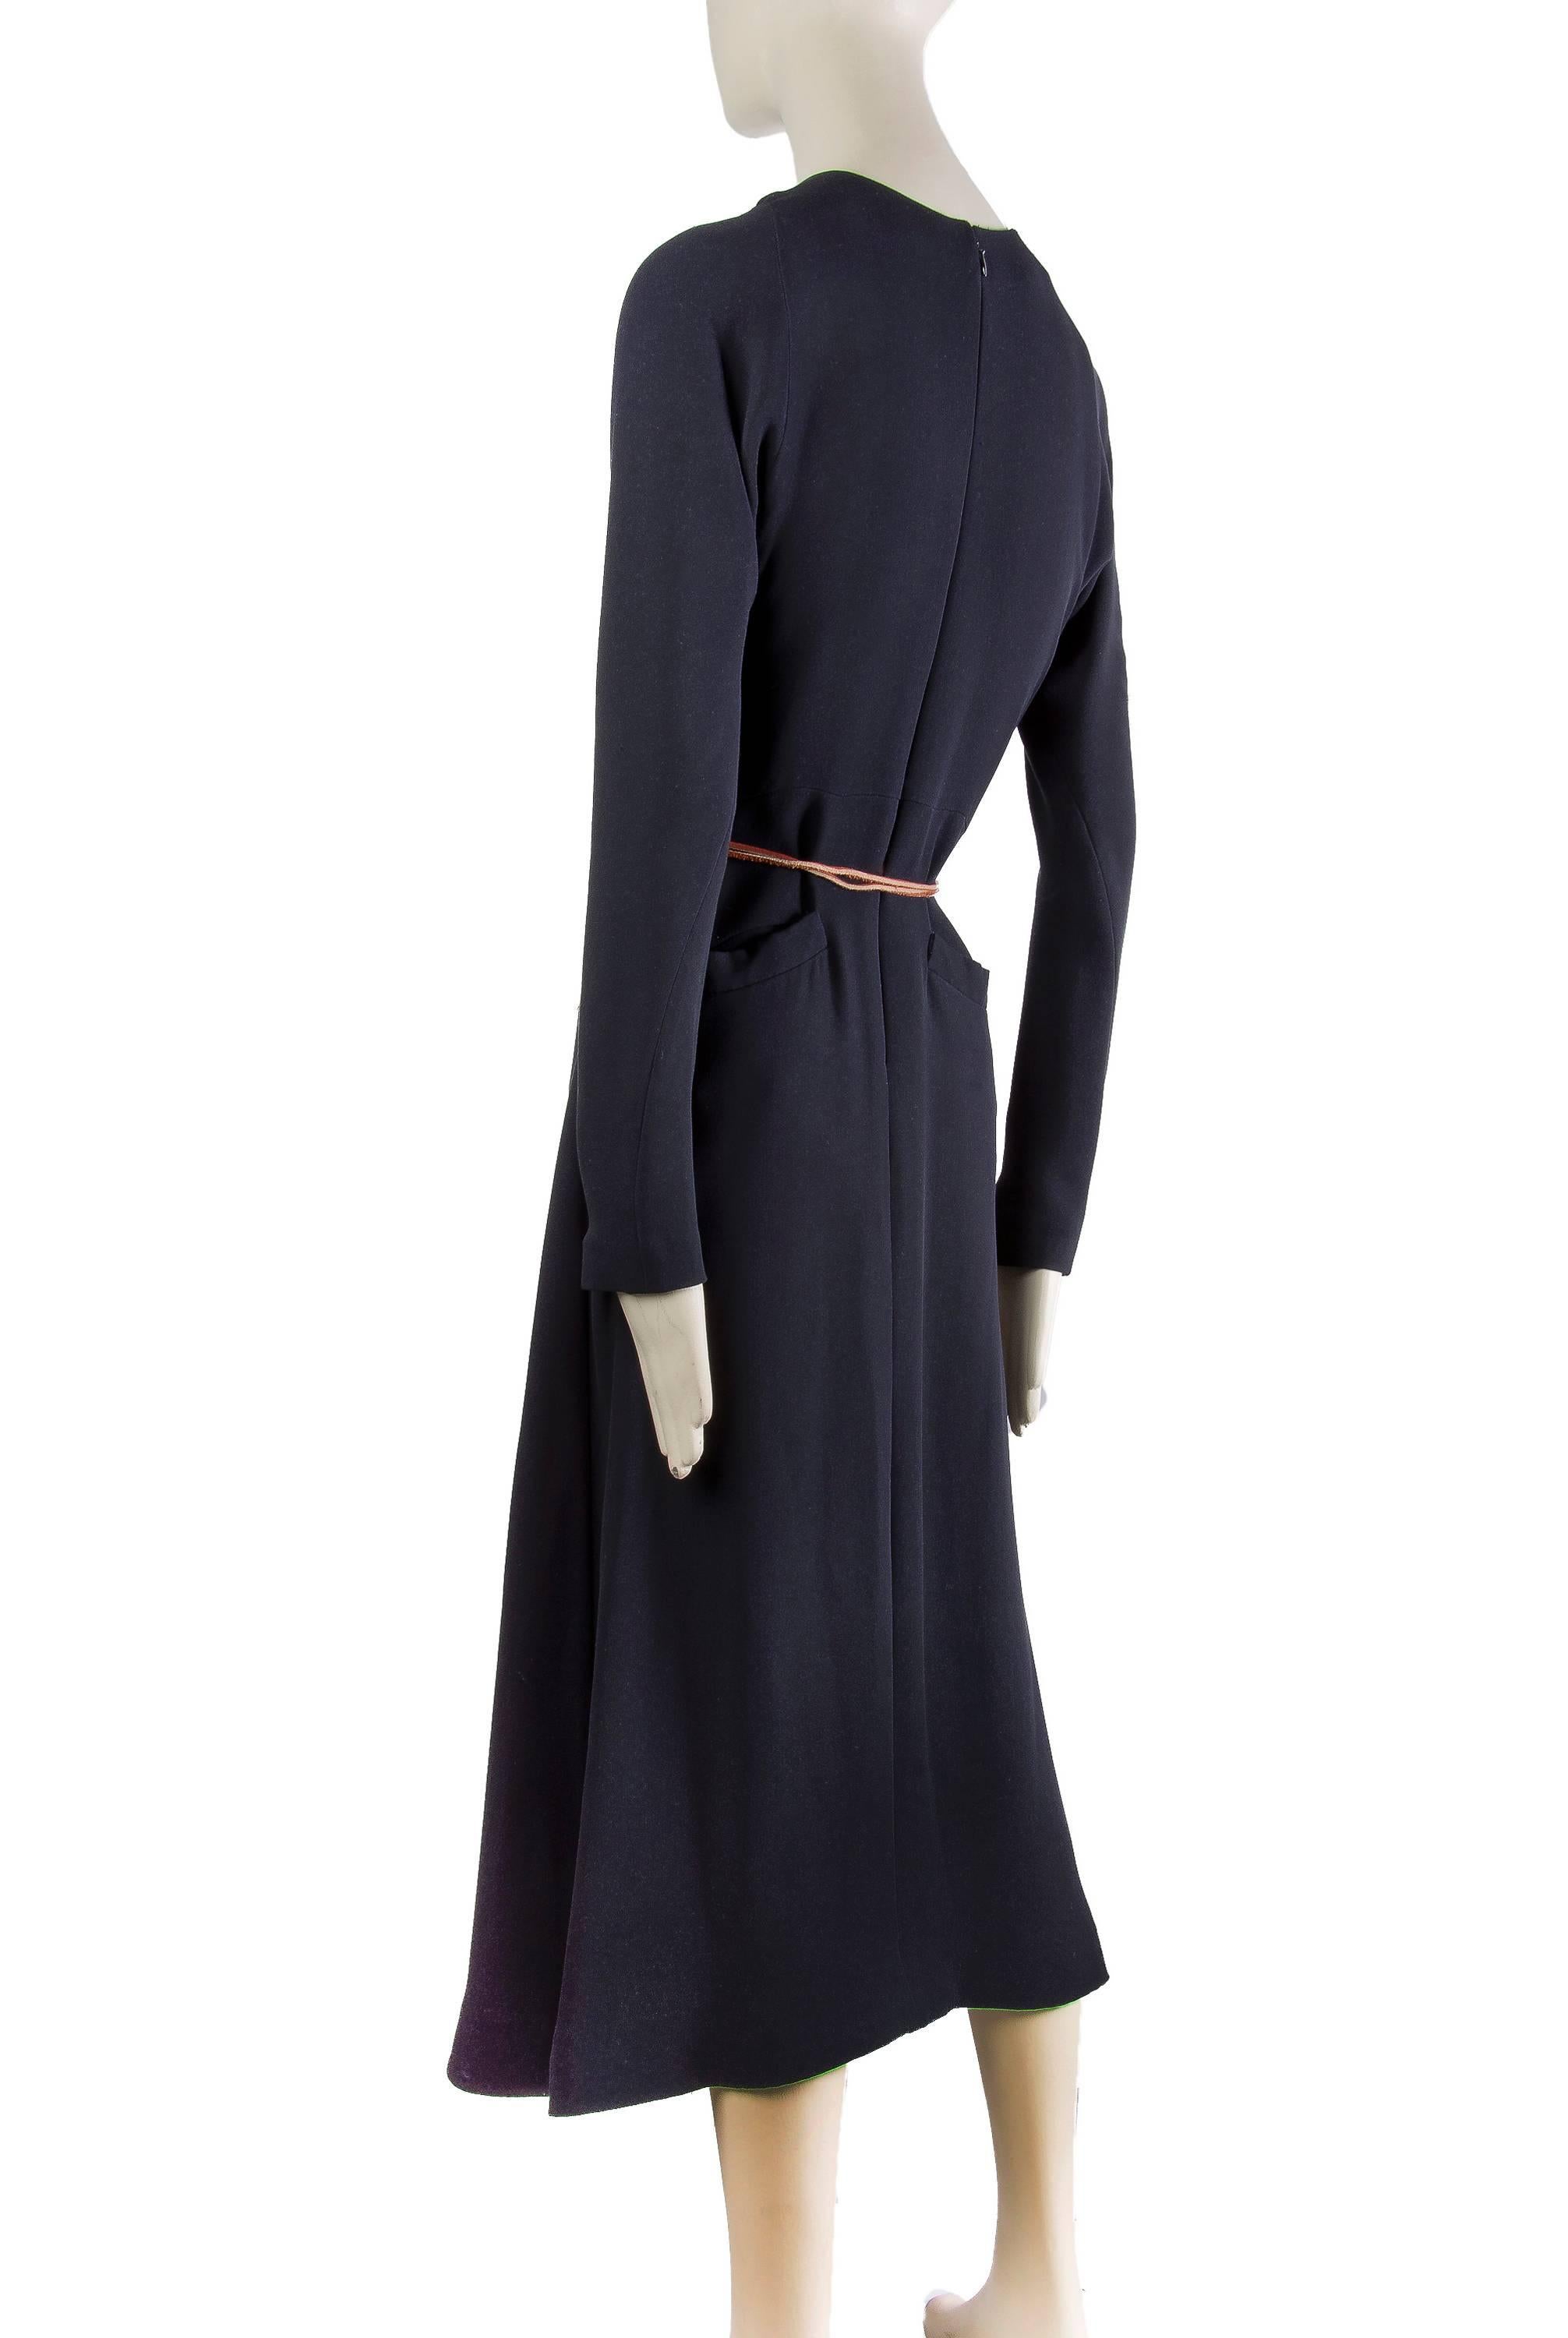 Couture Geoffrey Beene Maxi Dress - Rare For Sale 4